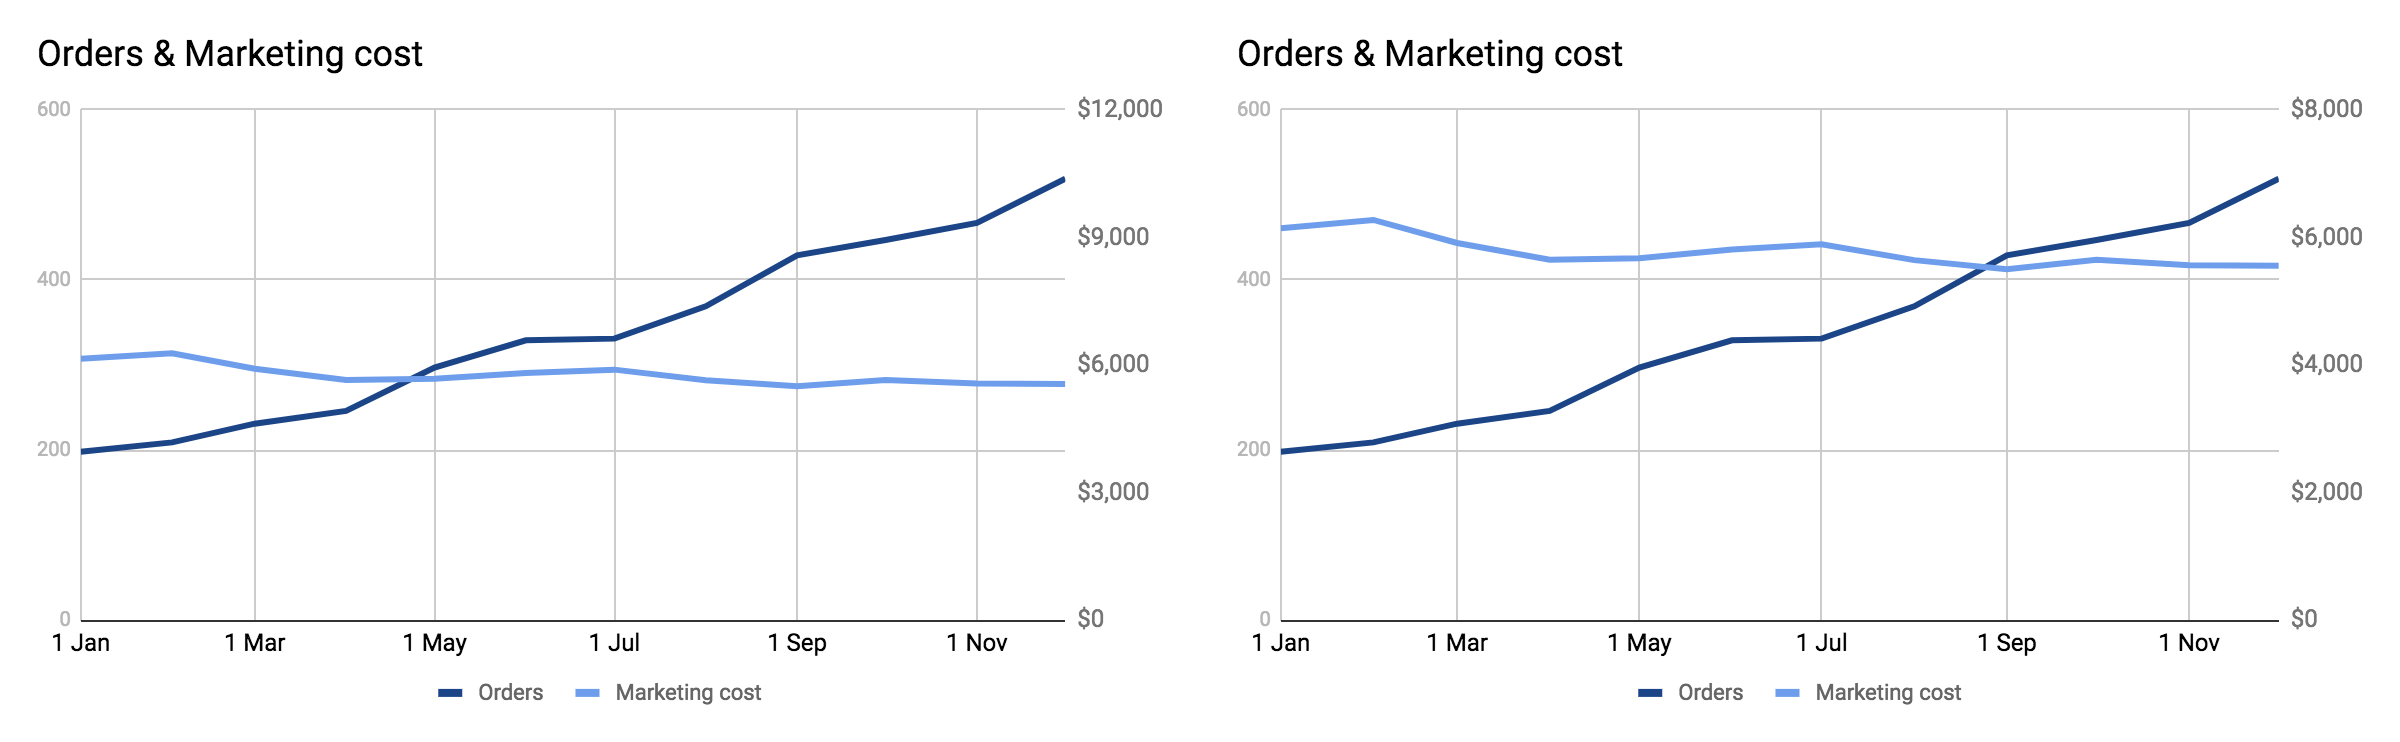 orders-marketing-cost.png